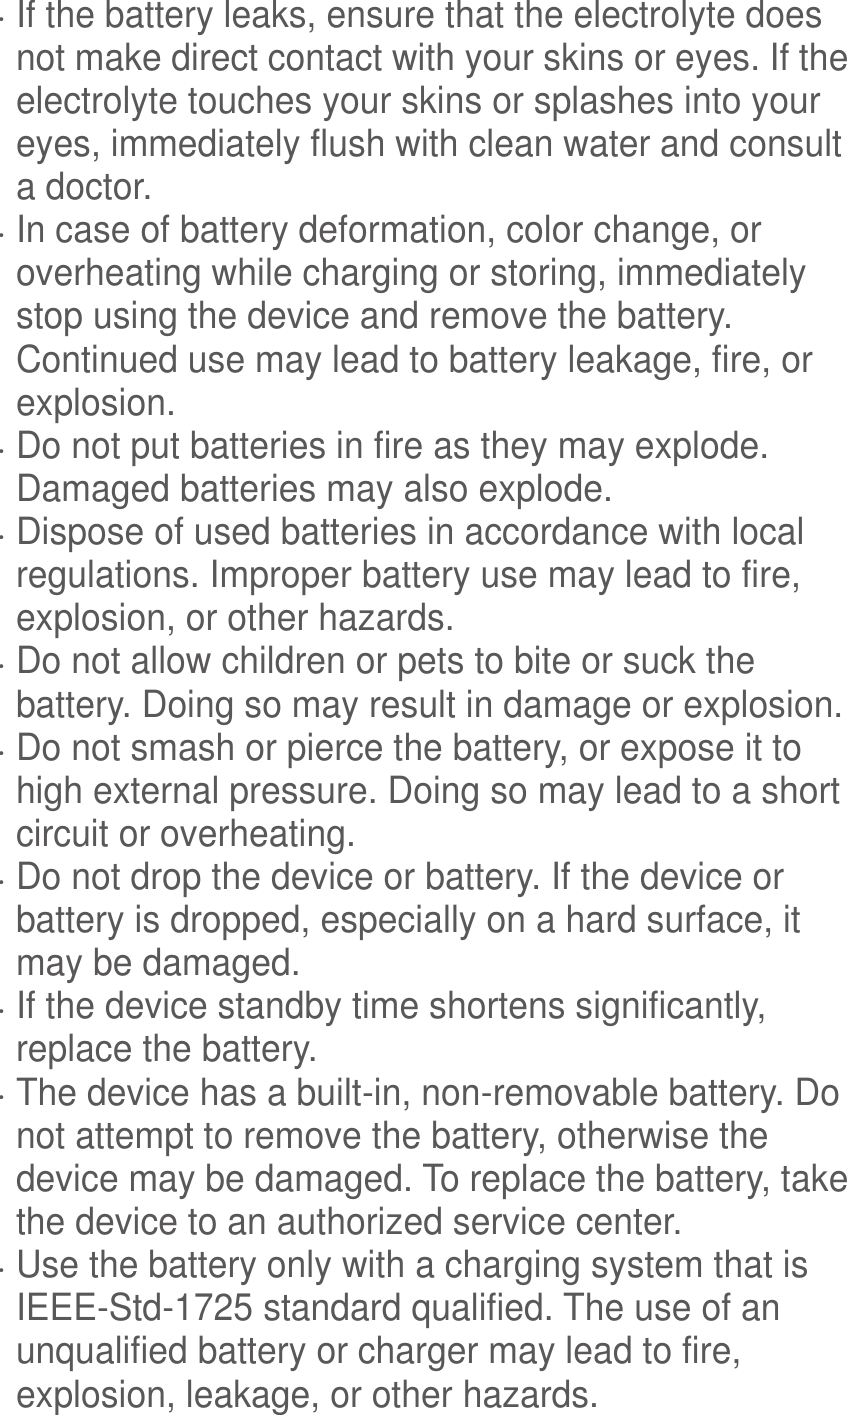   If the battery leaks, ensure that the electrolyte does not make direct contact with your skins or eyes. If the electrolyte touches your skins or splashes into your eyes, immediately flush with clean water and consult a doctor.  In case of battery deformation, color change, or overheating while charging or storing, immediately stop using the device and remove the battery. Continued use may lead to battery leakage, fire, or explosion.  Do not put batteries in fire as they may explode. Damaged batteries may also explode.  Dispose of used batteries in accordance with local regulations. Improper battery use may lead to fire, explosion, or other hazards.  Do not allow children or pets to bite or suck the battery. Doing so may result in damage or explosion.  Do not smash or pierce the battery, or expose it to high external pressure. Doing so may lead to a short circuit or overheating.    Do not drop the device or battery. If the device or battery is dropped, especially on a hard surface, it may be damaged.    If the device standby time shortens significantly, replace the battery.  The device has a built-in, non-removable battery. Do not attempt to remove the battery, otherwise the device may be damaged. To replace the battery, take the device to an authorized service center.    Use the battery only with a charging system that is IEEE-Std-1725 standard qualified. The use of an unqualified battery or charger may lead to fire, explosion, leakage, or other hazards. 